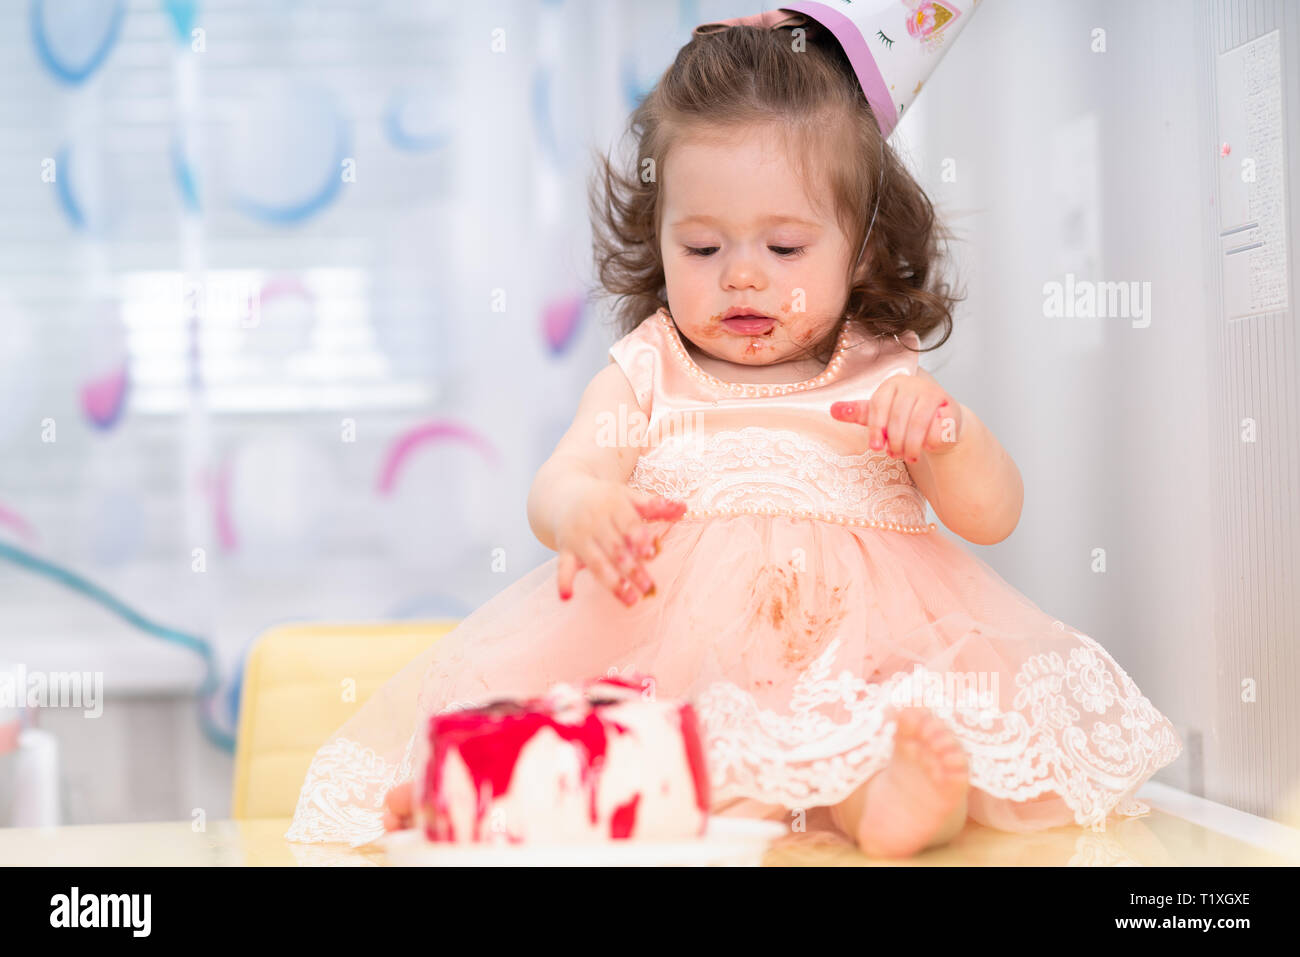 Cute sticky messy little girl in a pink dress eating her birthday cake wearing a party hat Stock Photo